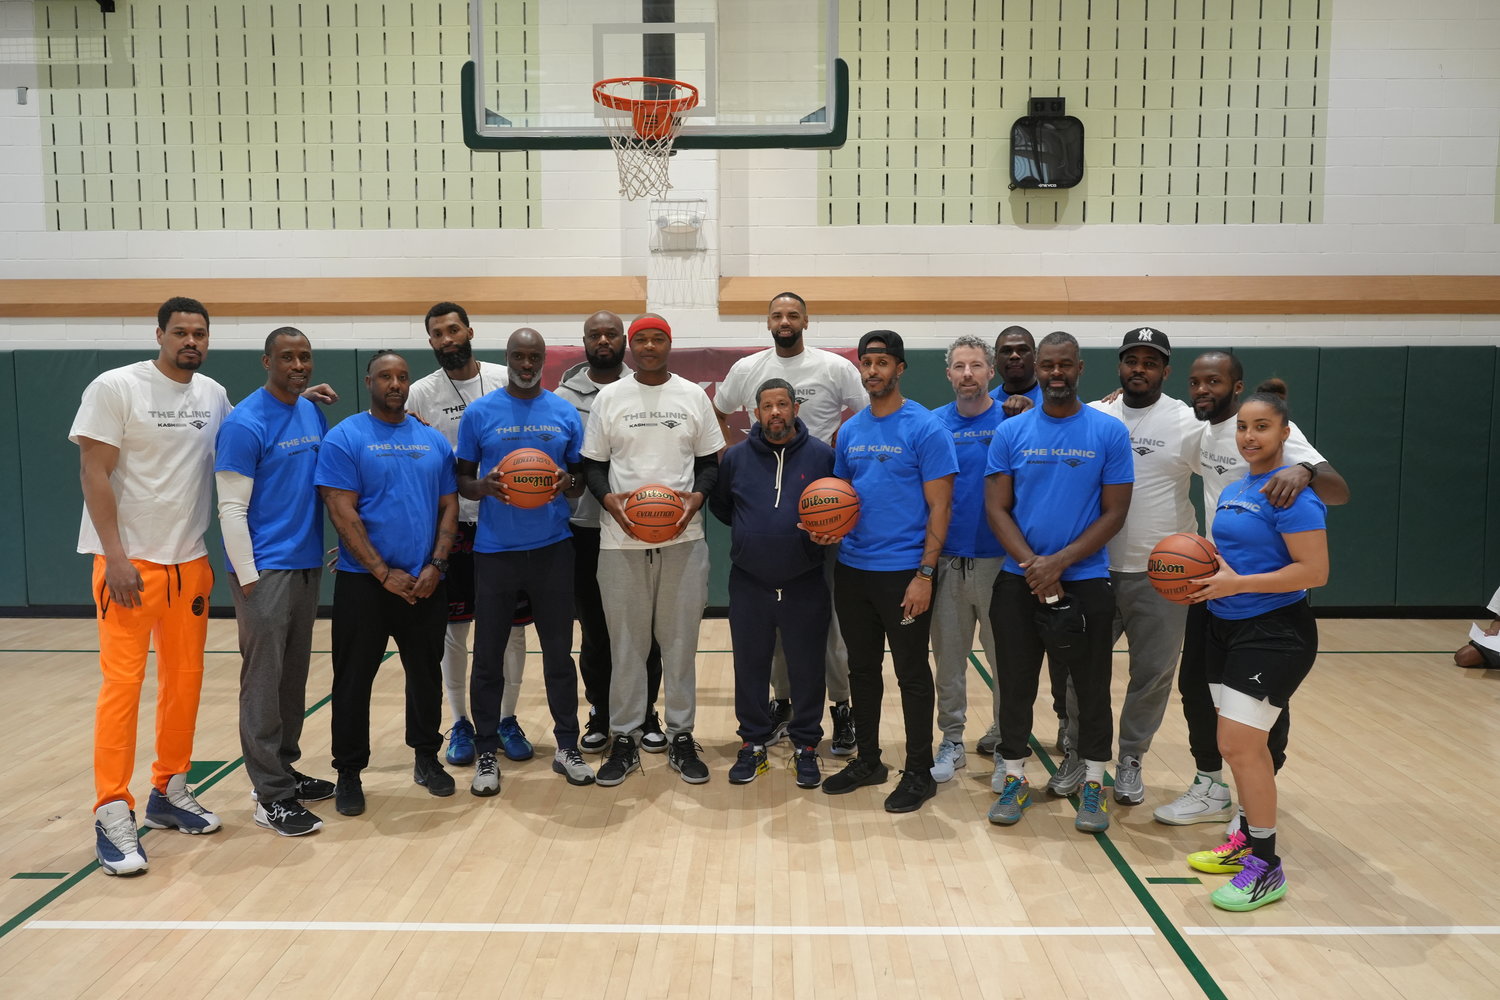 Many of the coaches who volunteered in the Klinic Kids program in Elmont are former college and professional basketball players.